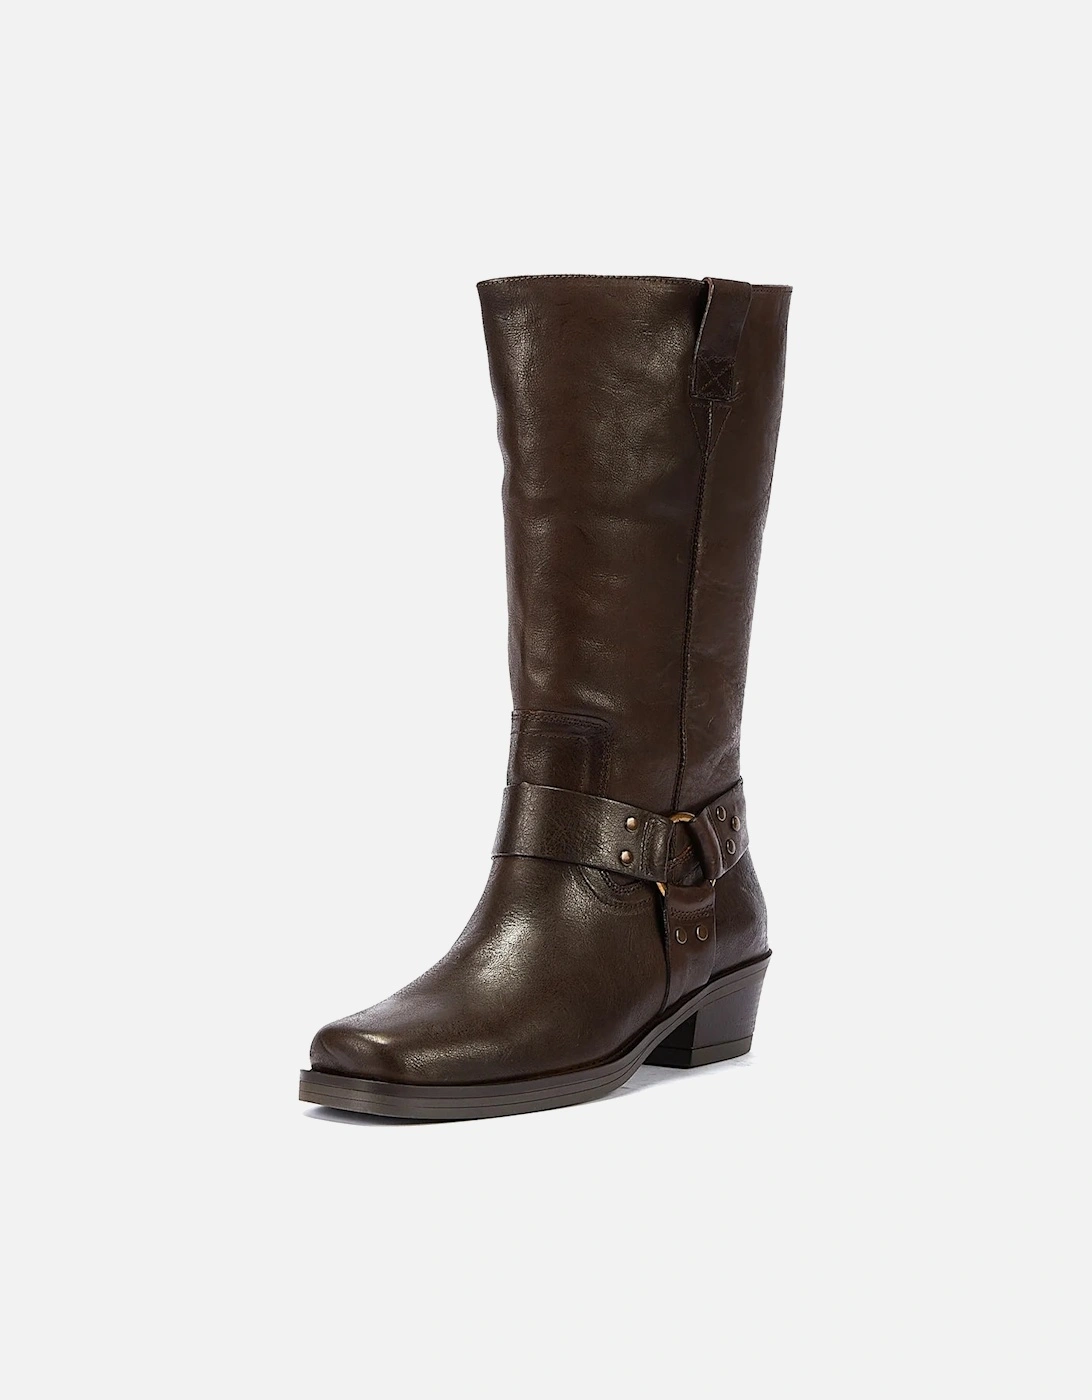 Trig-Ger Harness Waxy Leather Women's Brown Boots